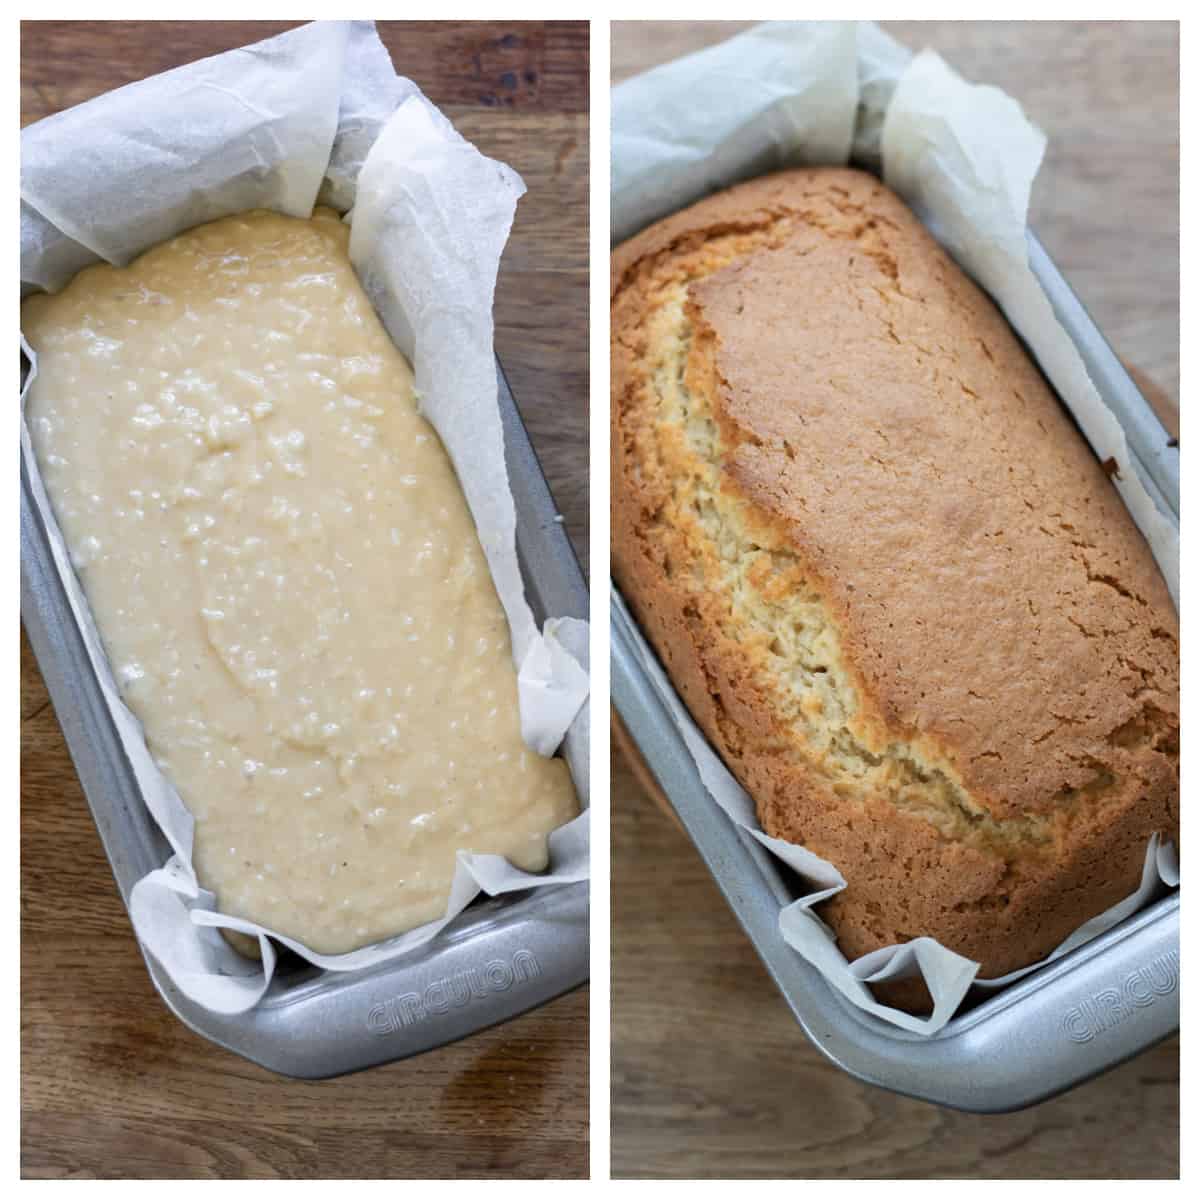 Batter in a loaf pan, and a baked coconut bread in the pan.